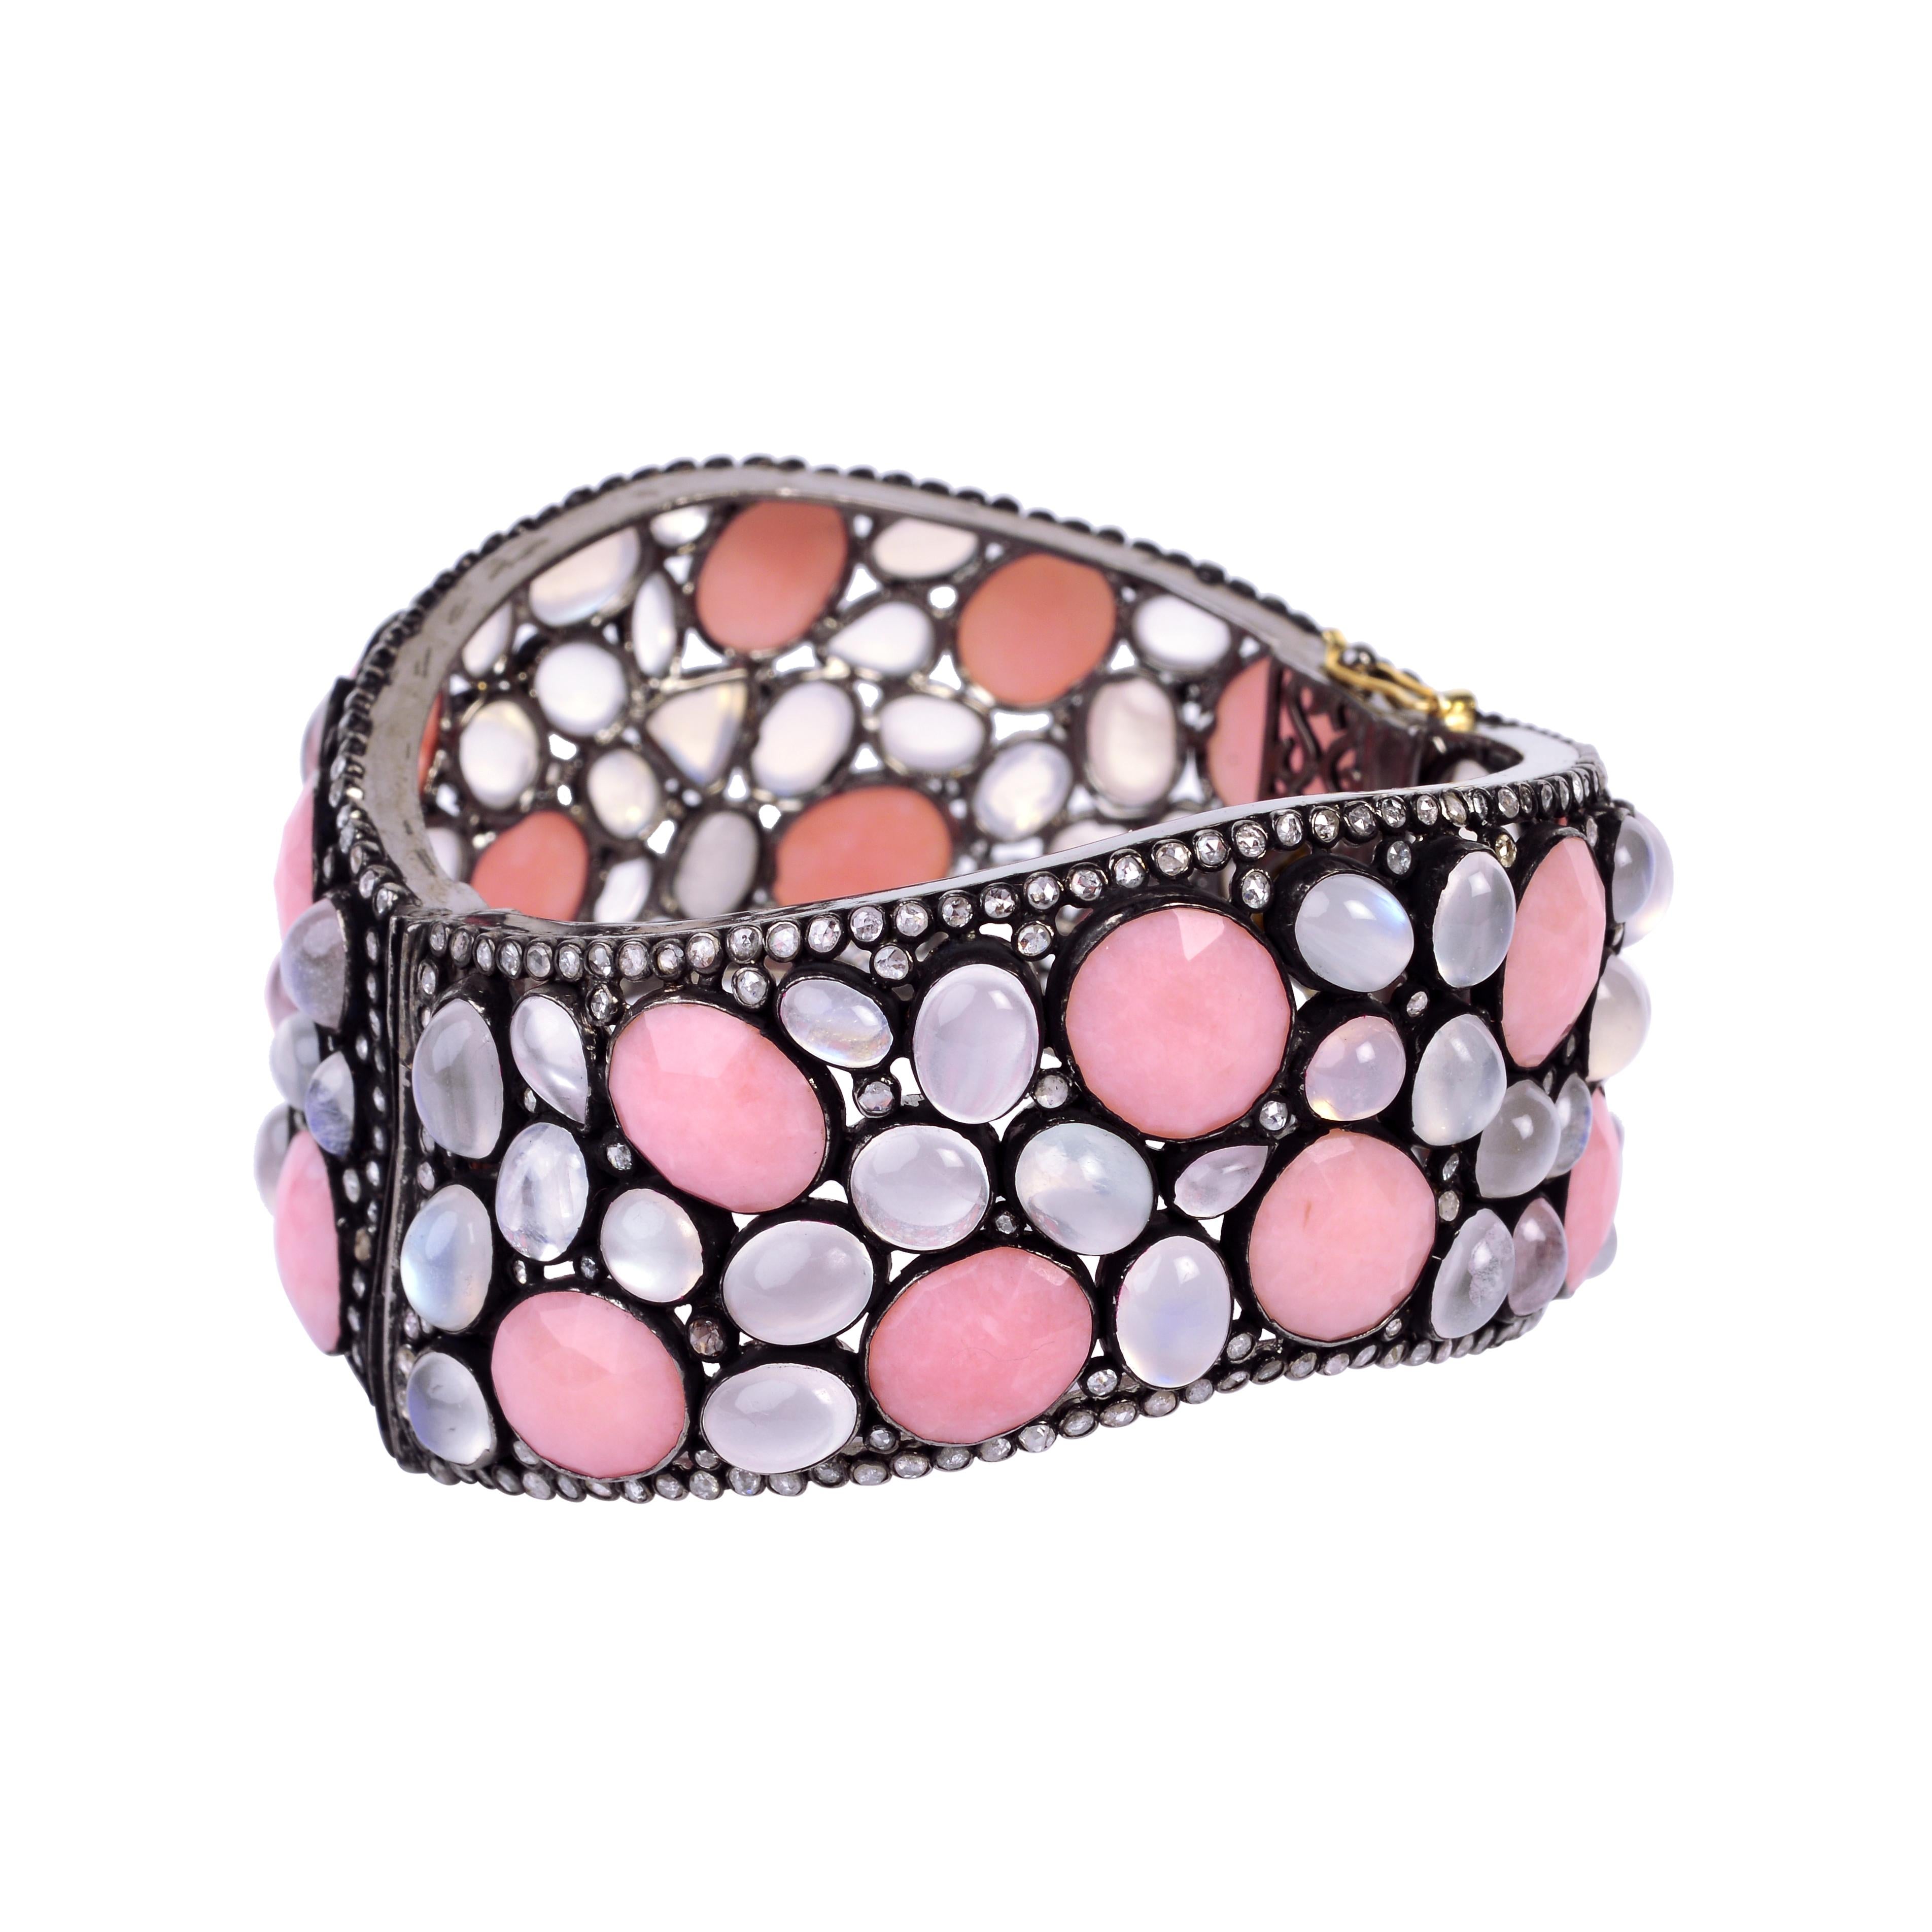 Mixed Cut Pink Opal & Moonstone Cuff with Pave Diamonds Made in 14k Gold & Silver For Sale